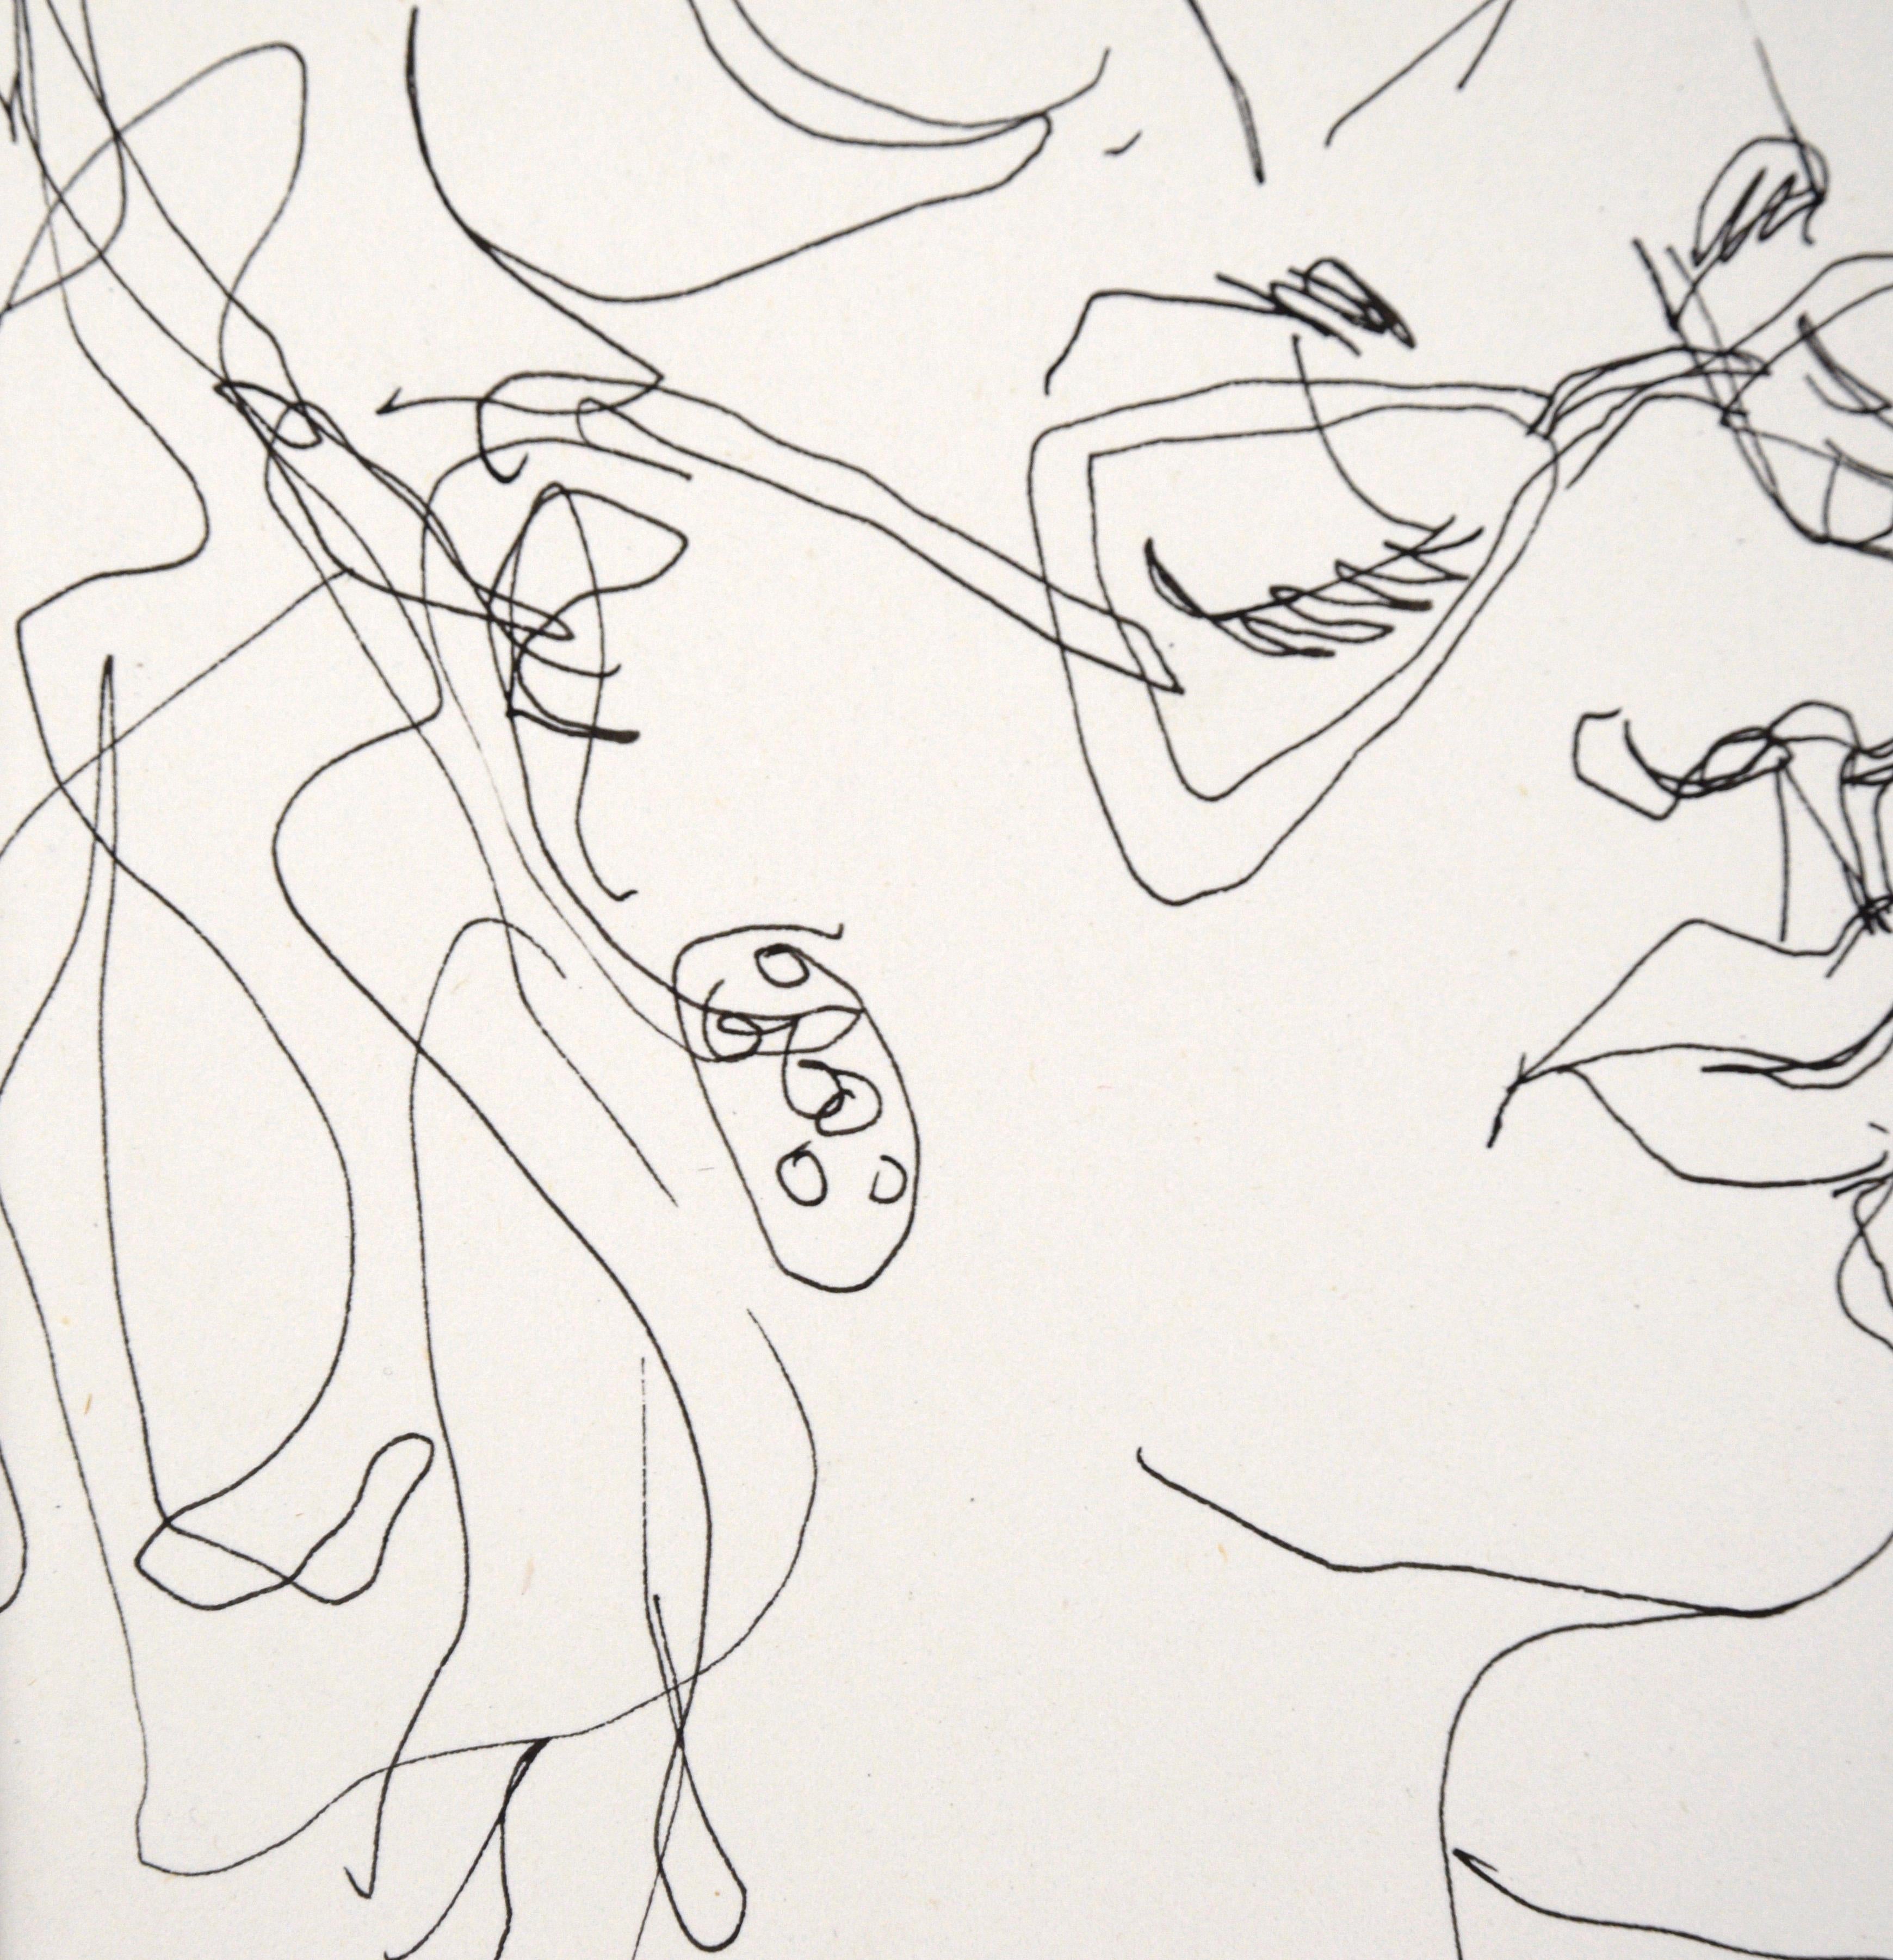 Portrait of a Woman with Glasses - Drawing in Pen on Paper - Contemporary Art by Unknown